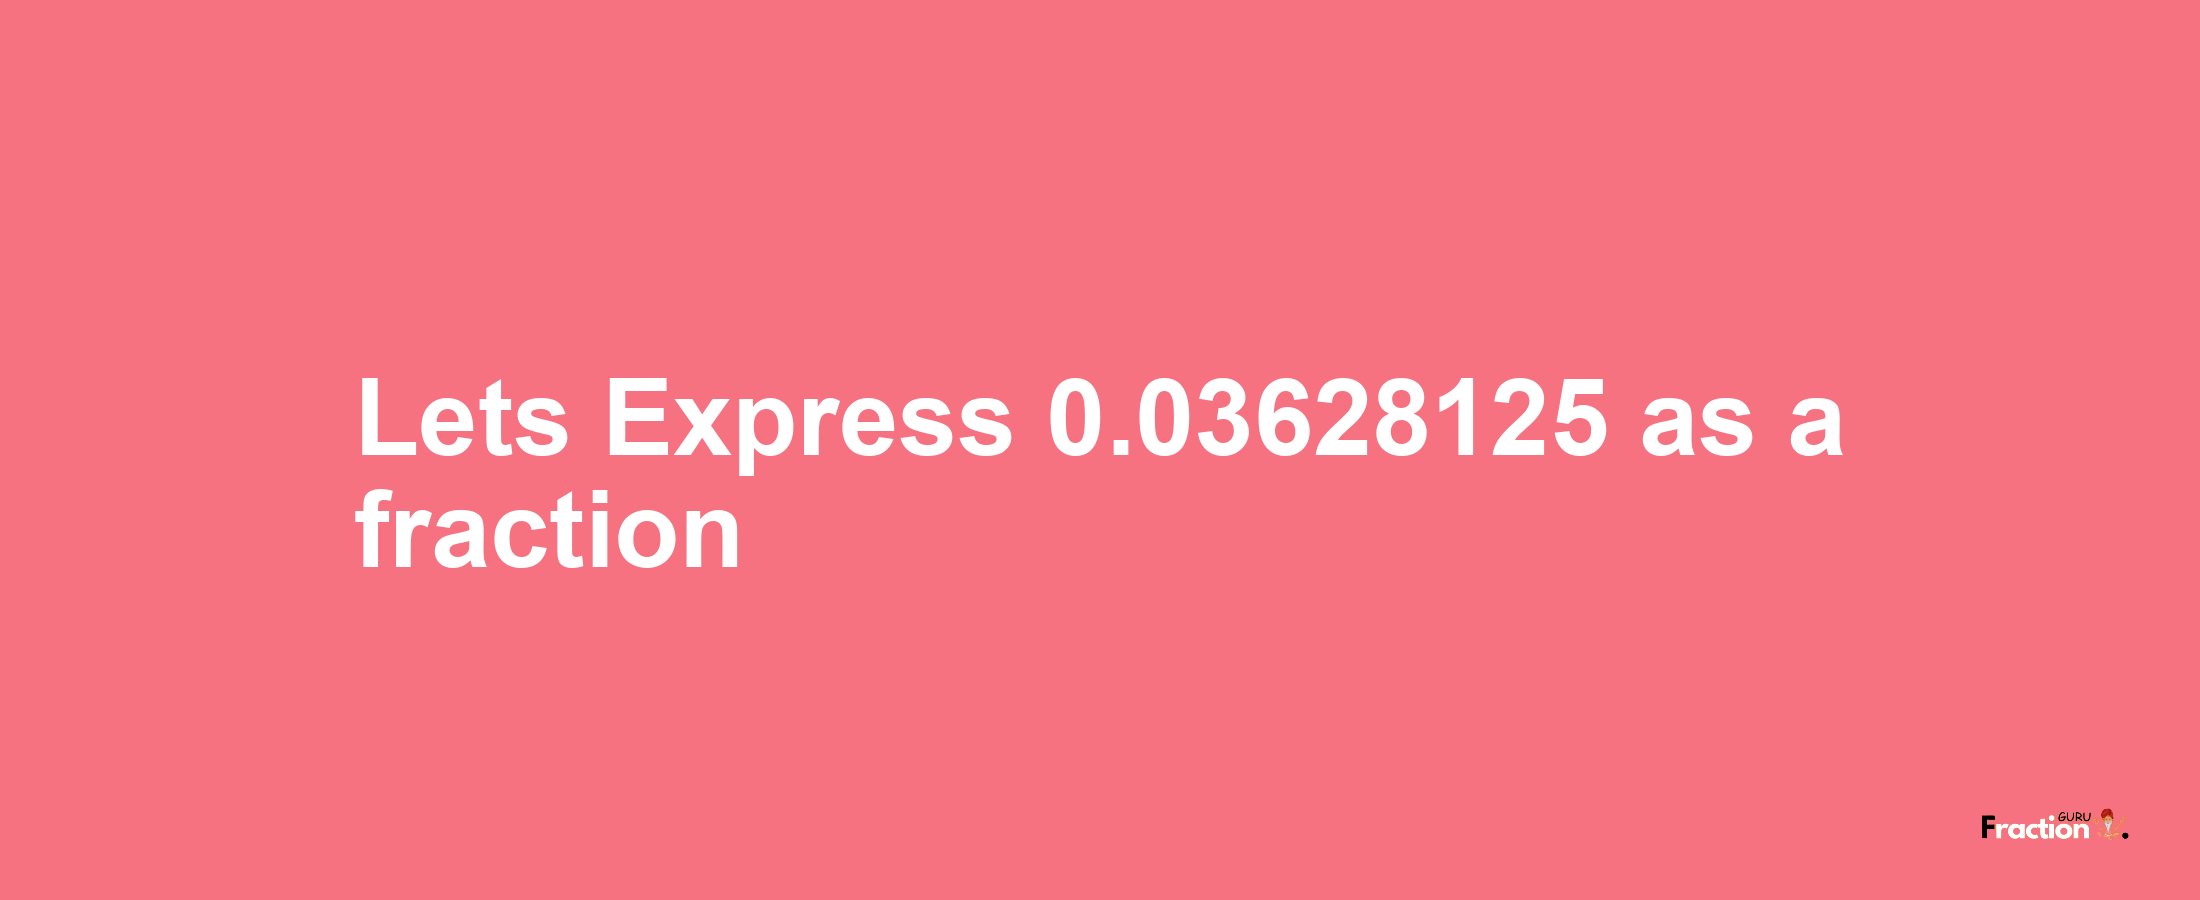 Lets Express 0.03628125 as afraction